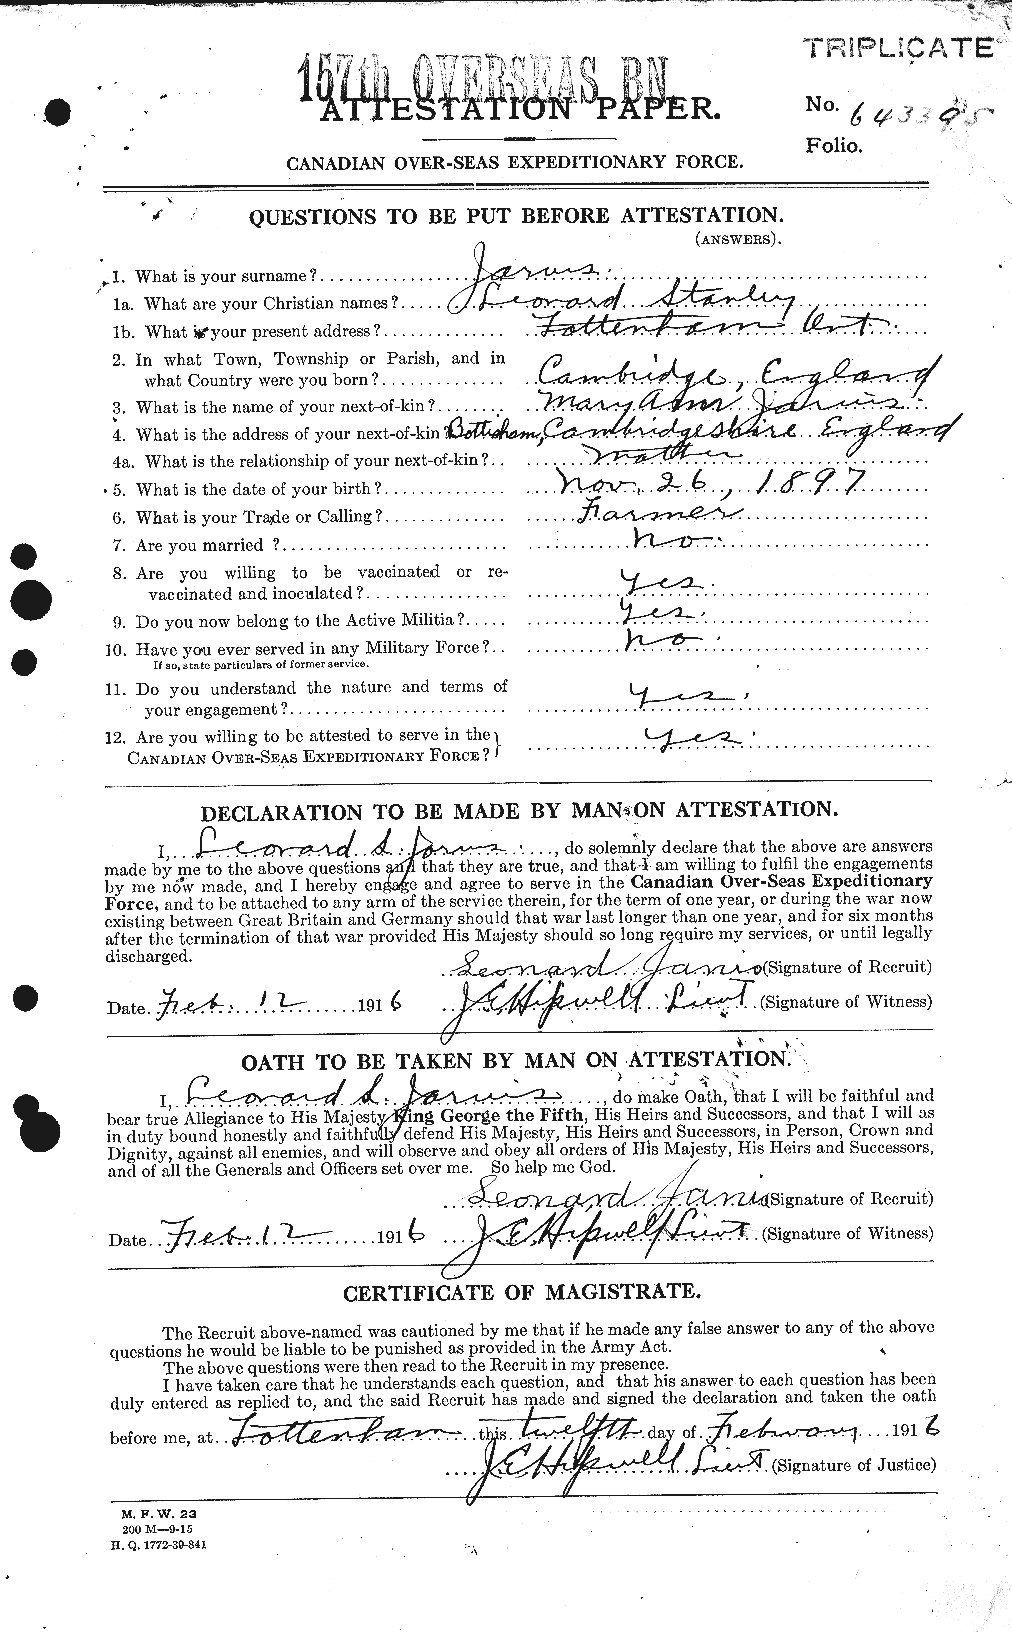 Personnel Records of the First World War - CEF 415833a